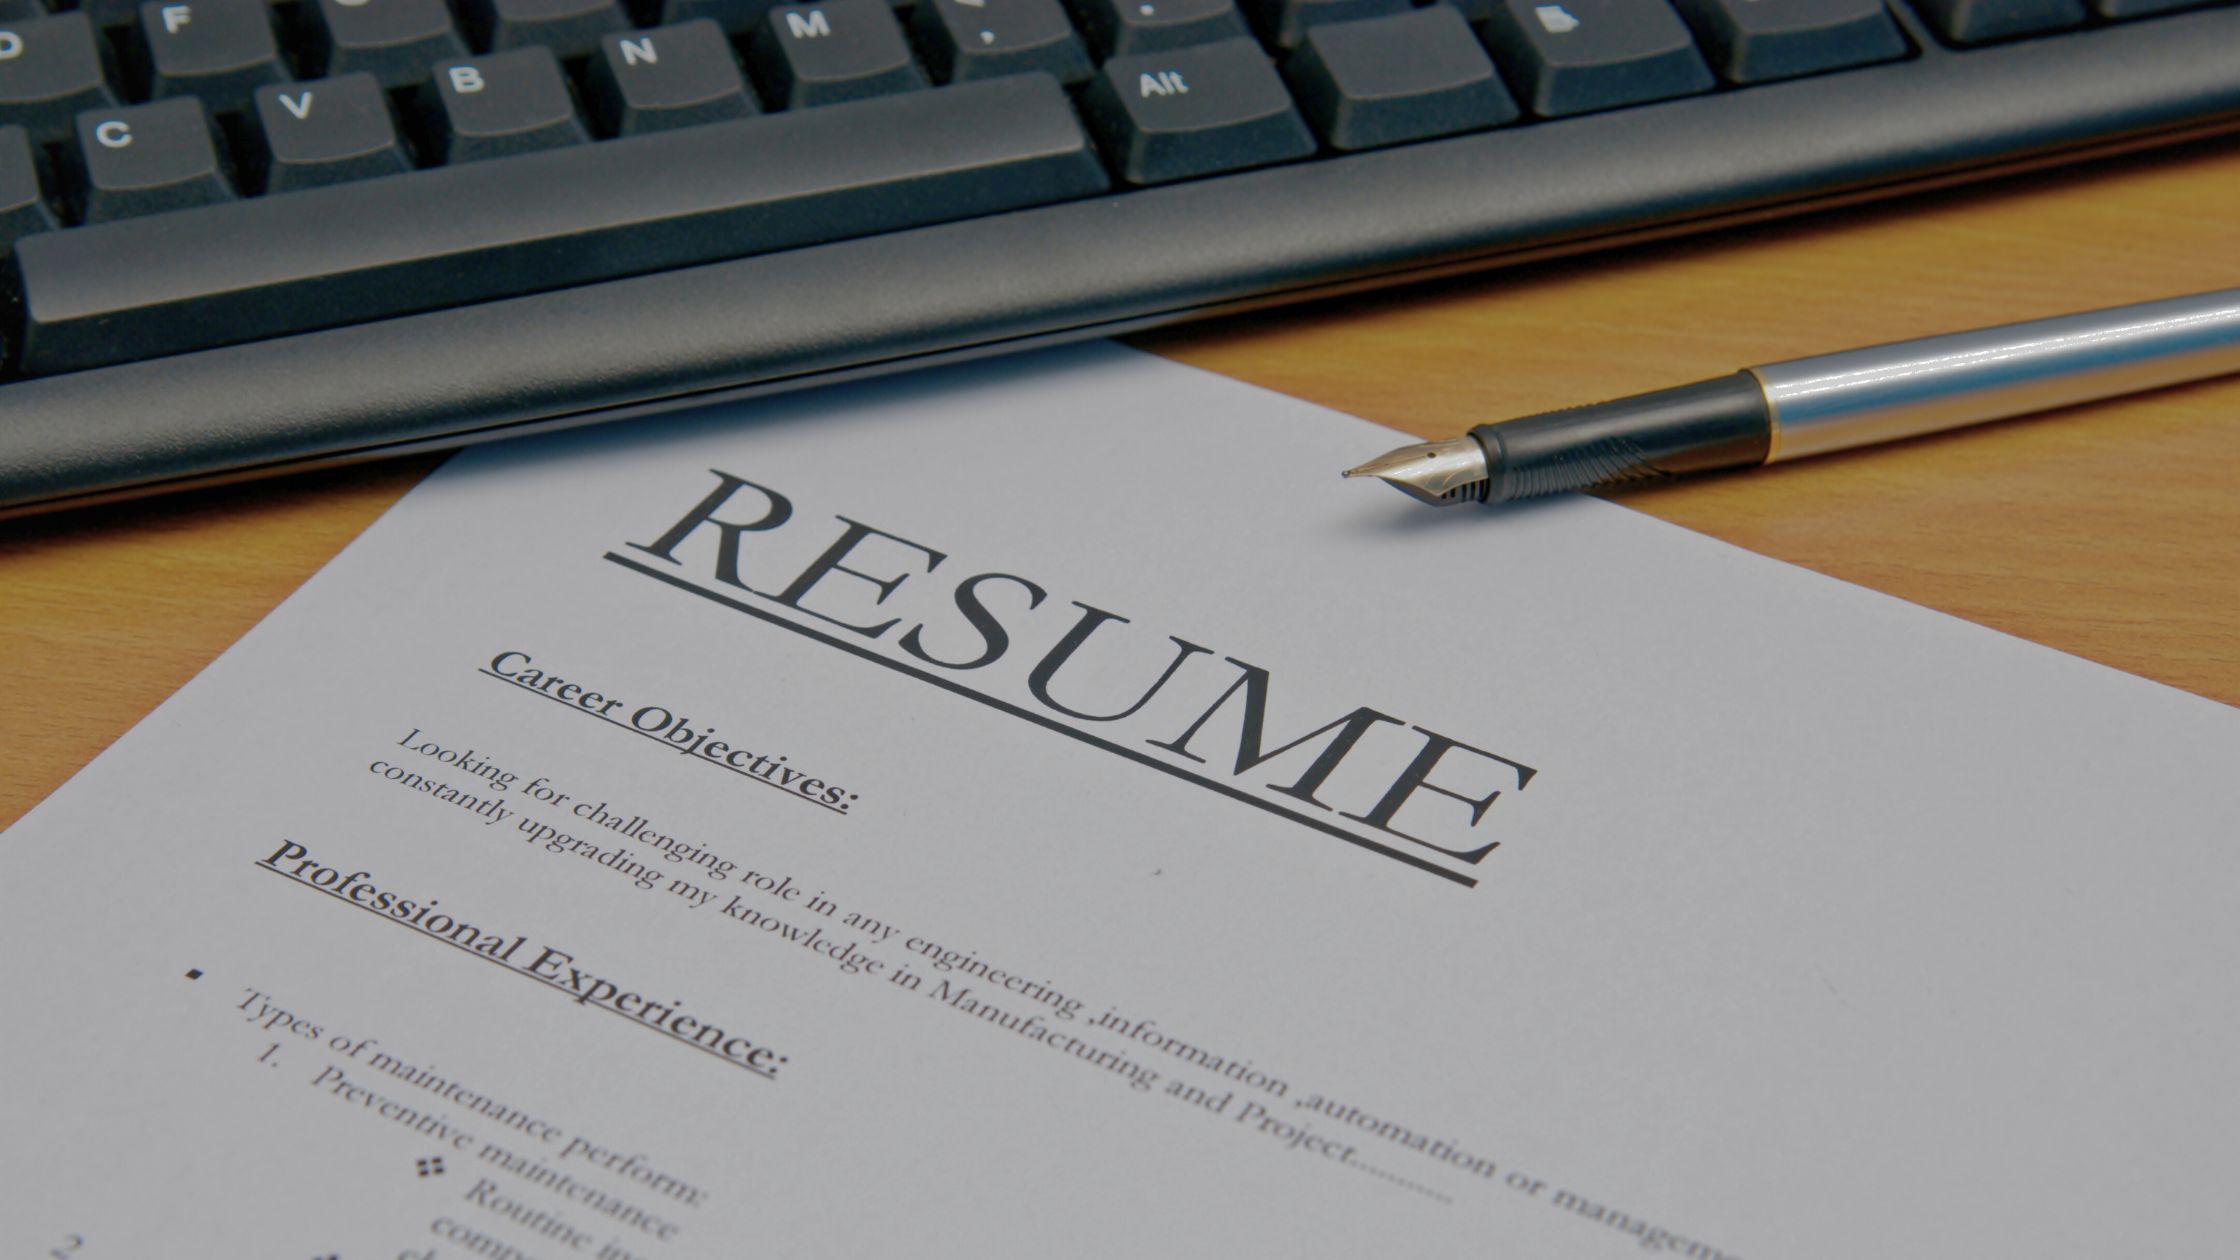 image of a resume, pen and keyboard on a table